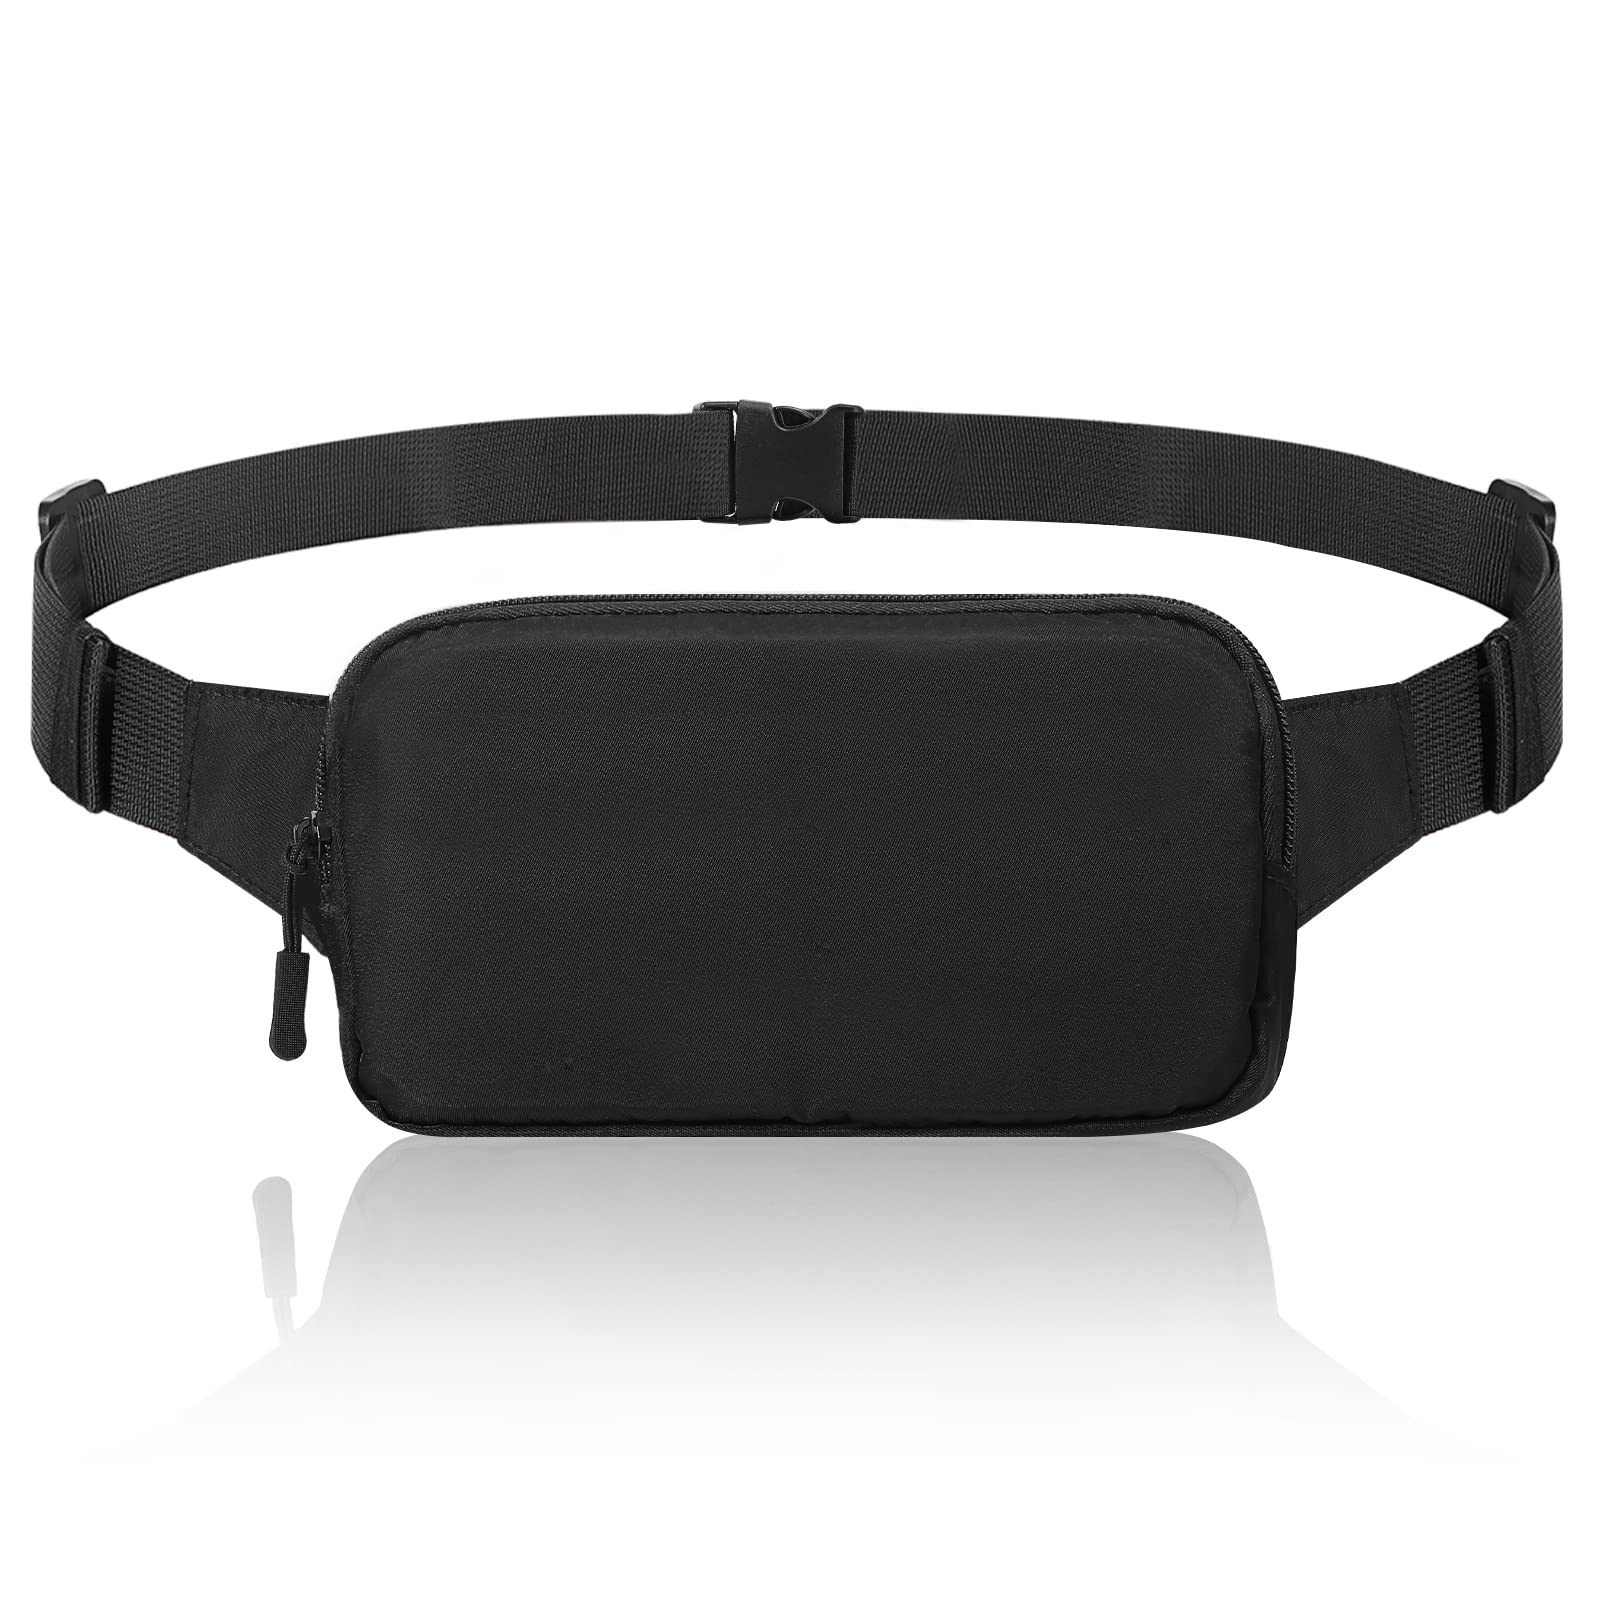 Fanny Packs for Women & Men, Fashion Waist Pack Small Belt Bag with  Adjustable Strap for Running, Travel and Hiking